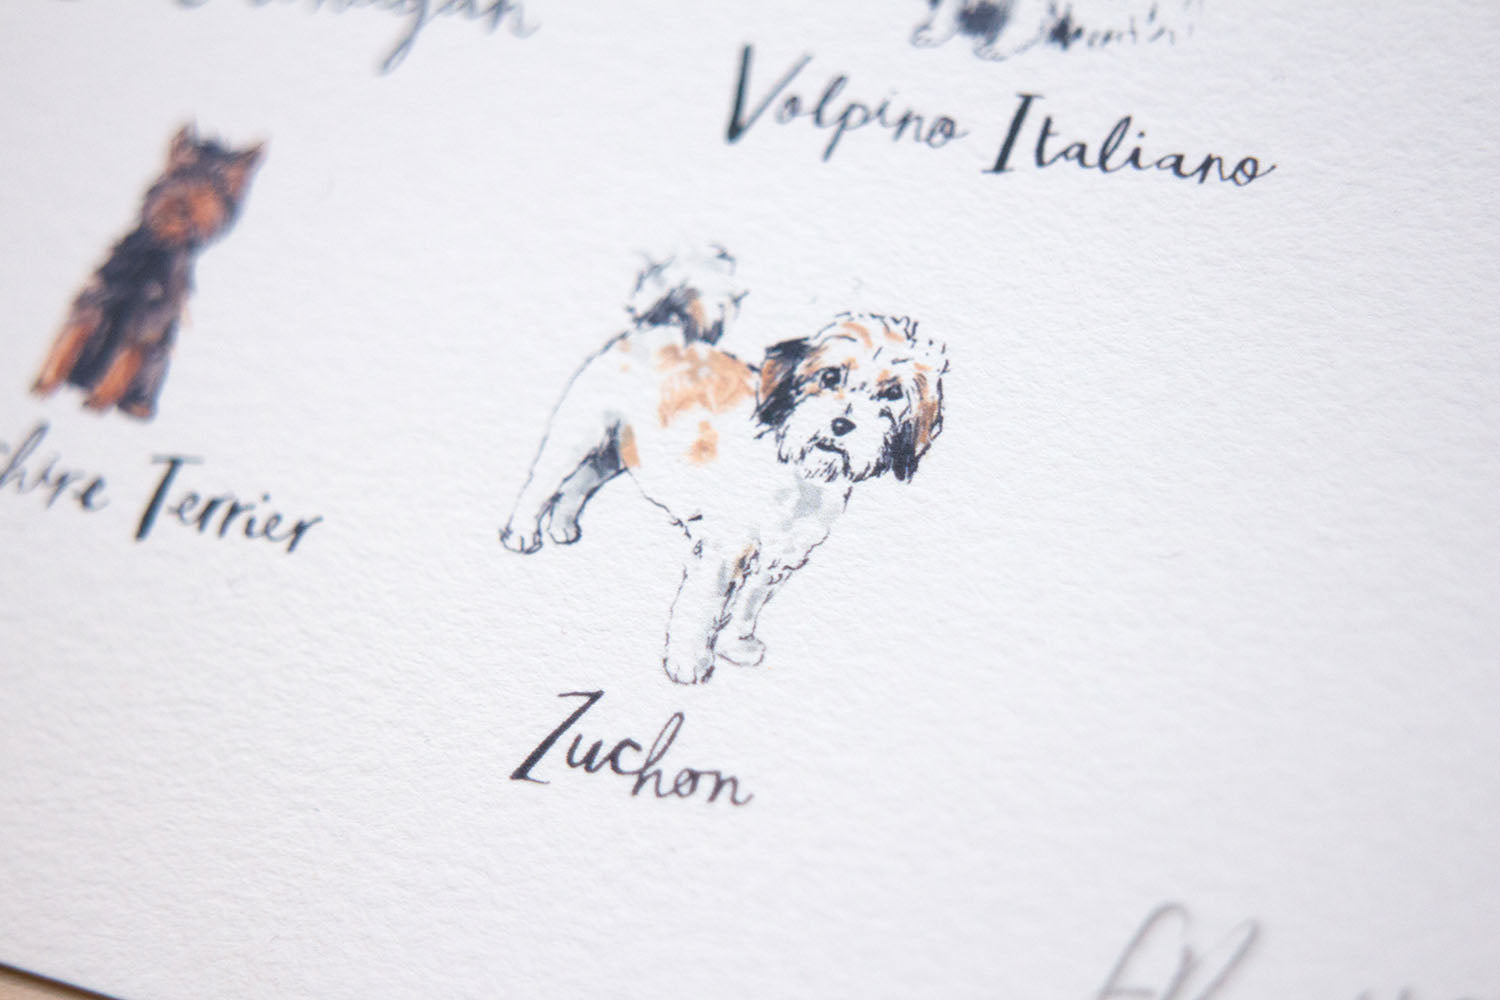 A4 A to Z of Dogs Art Print